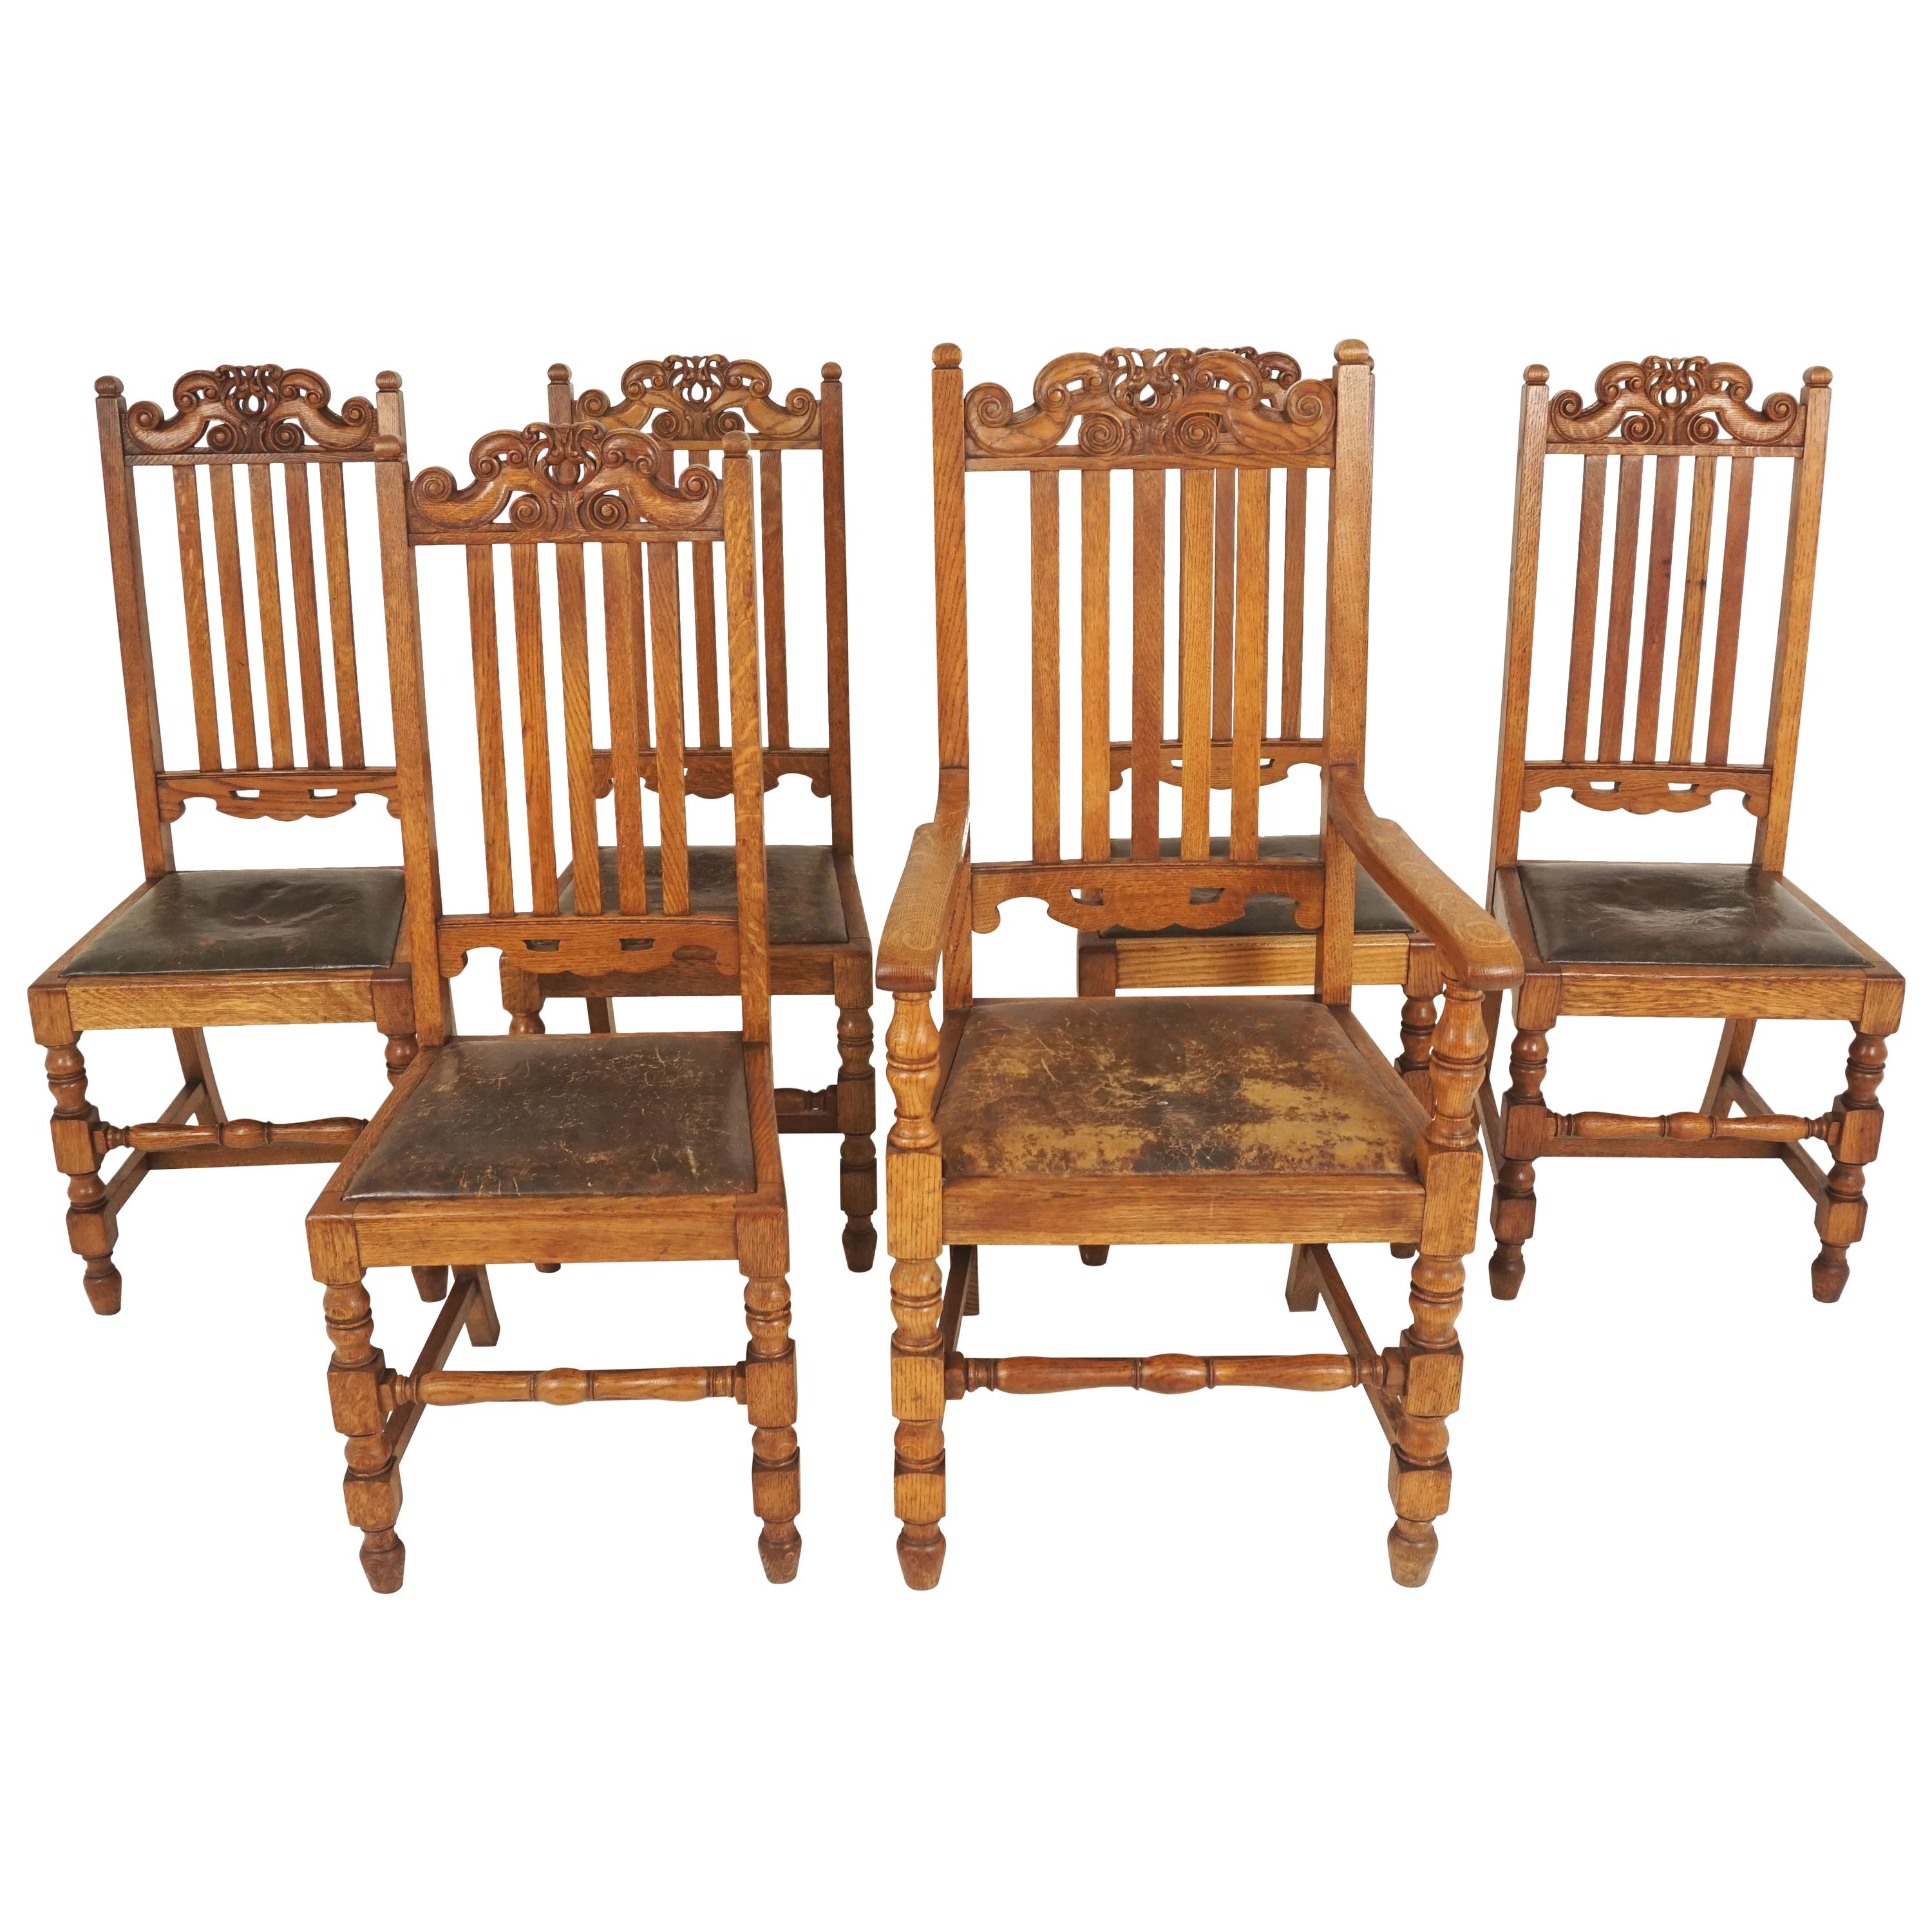 6 Antique Carved Oak Arts & Crafts Dining Chairs '5 + 1', Scotland 1910, B2417